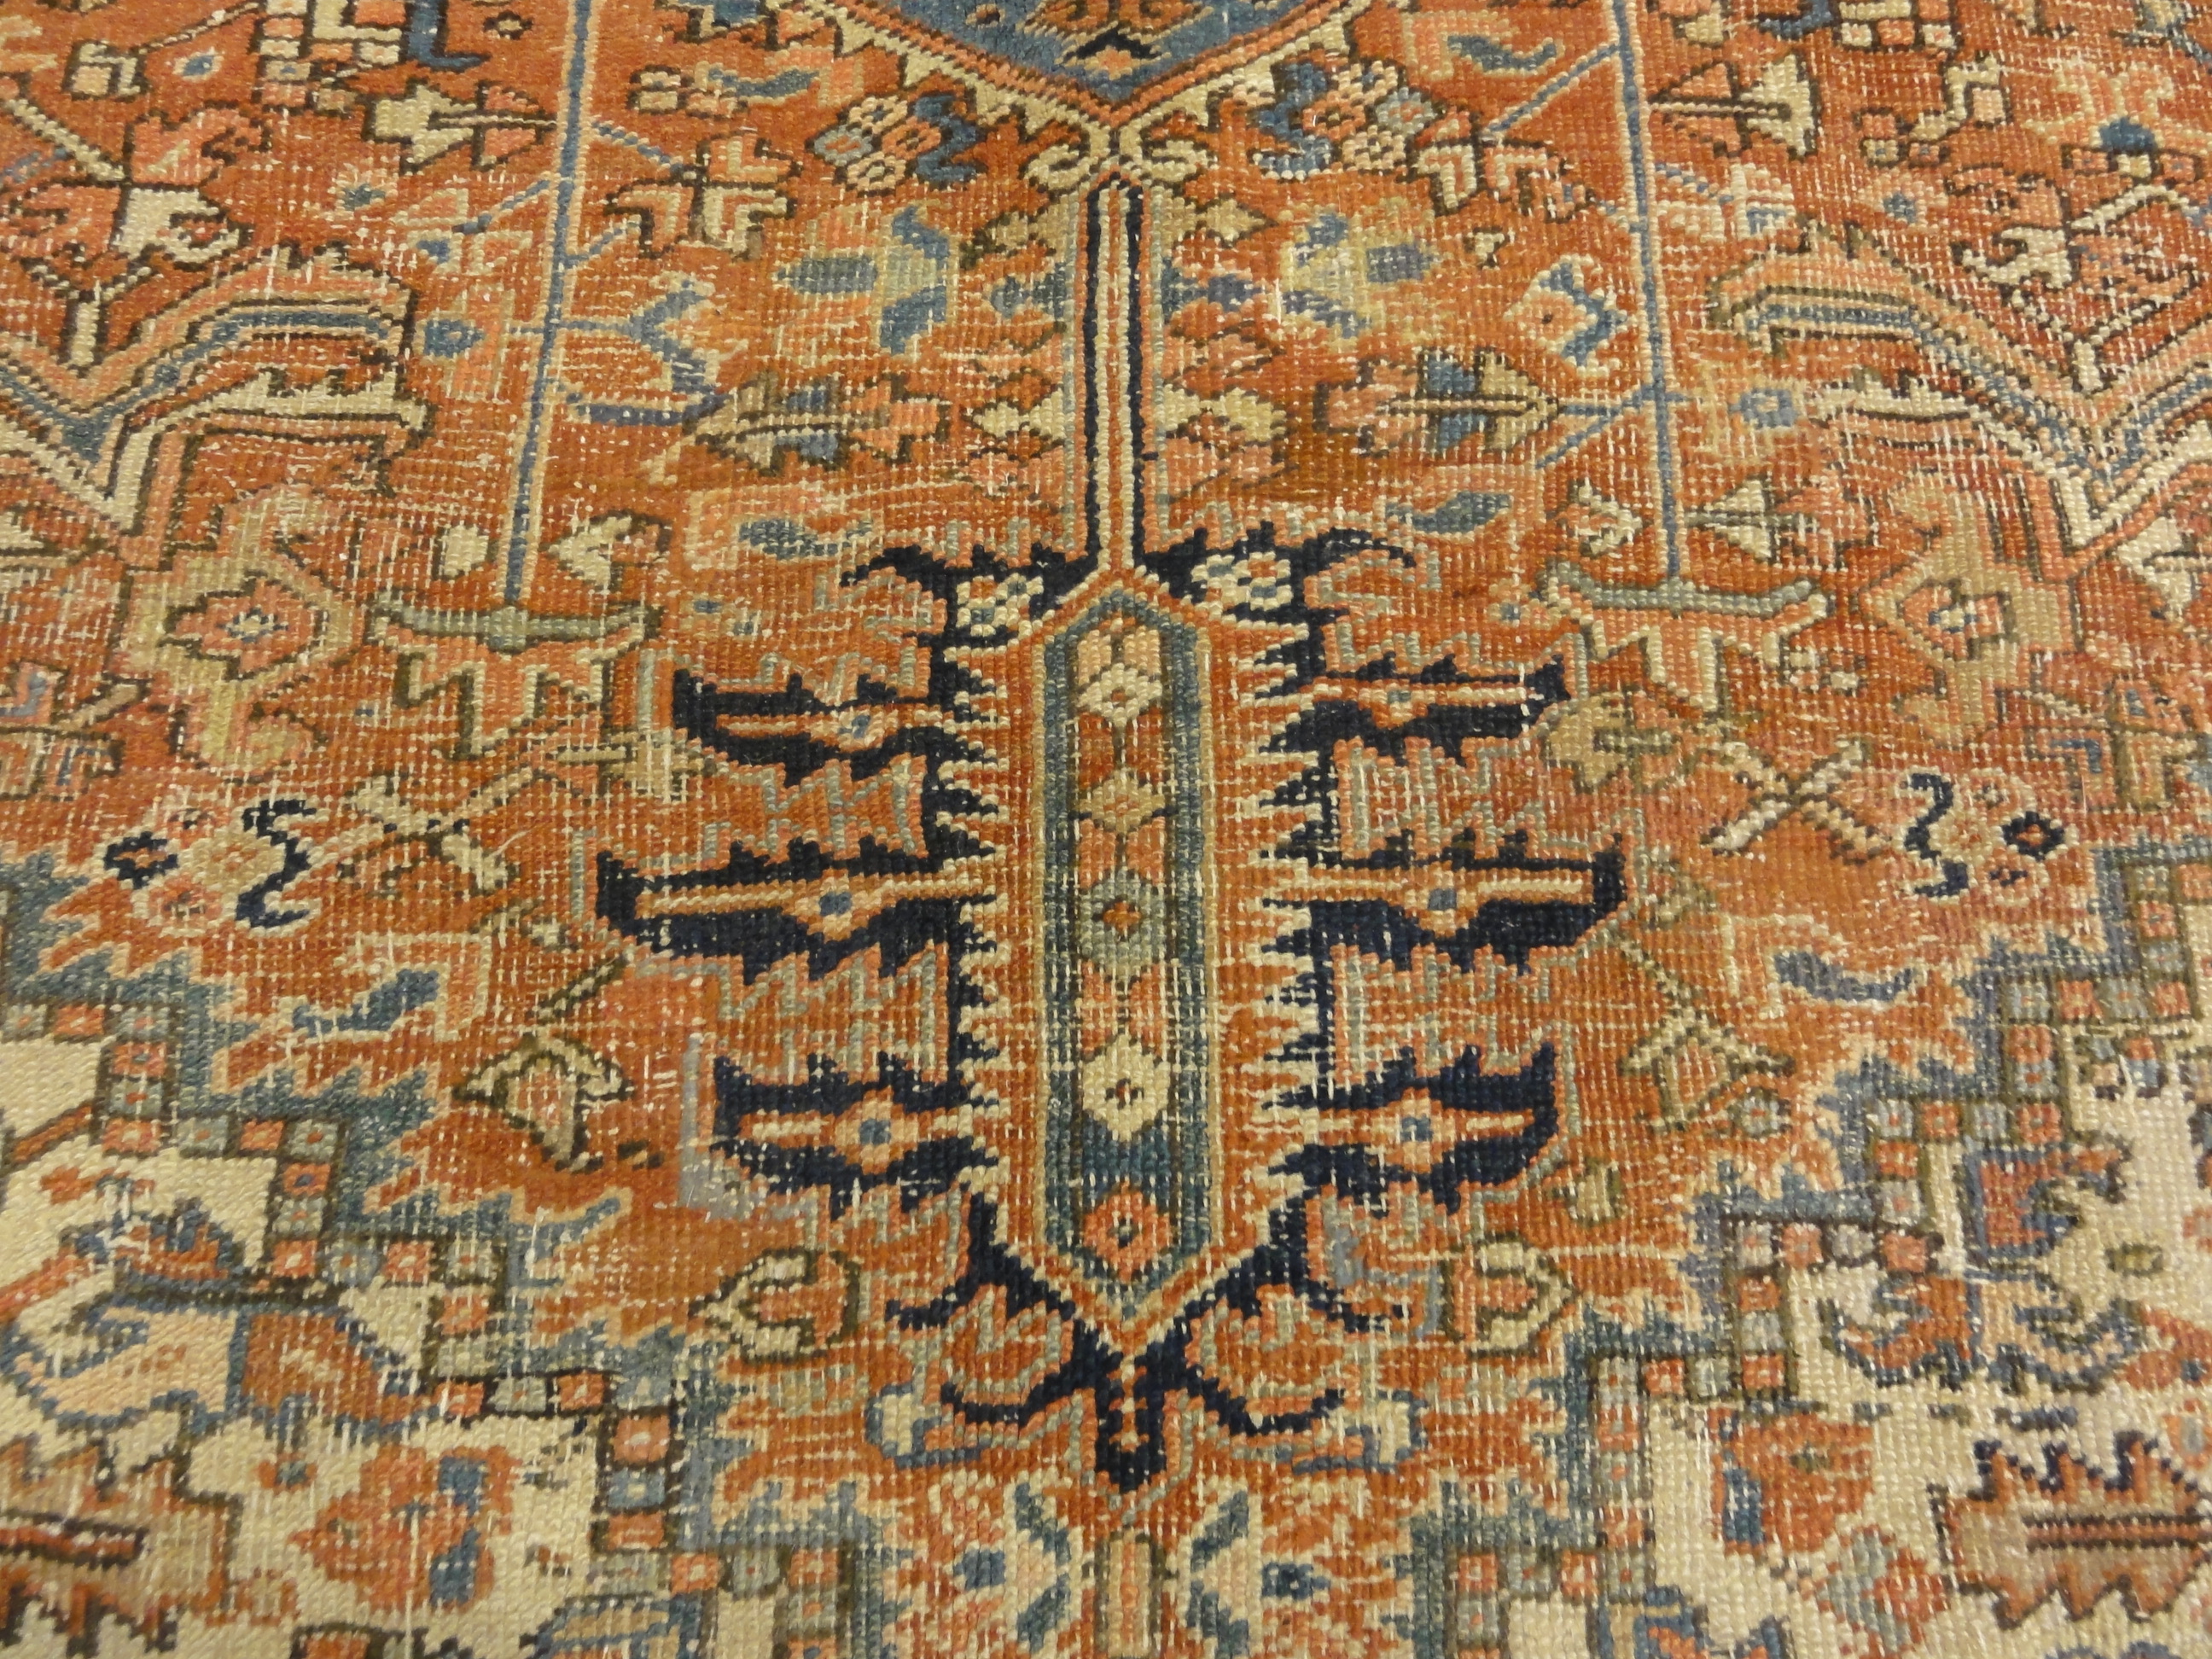 Antique Heriz Rug. A piece of genuine authentic antique woven carpet art sold by the Santa Barbara Design Center, Rugs and More.